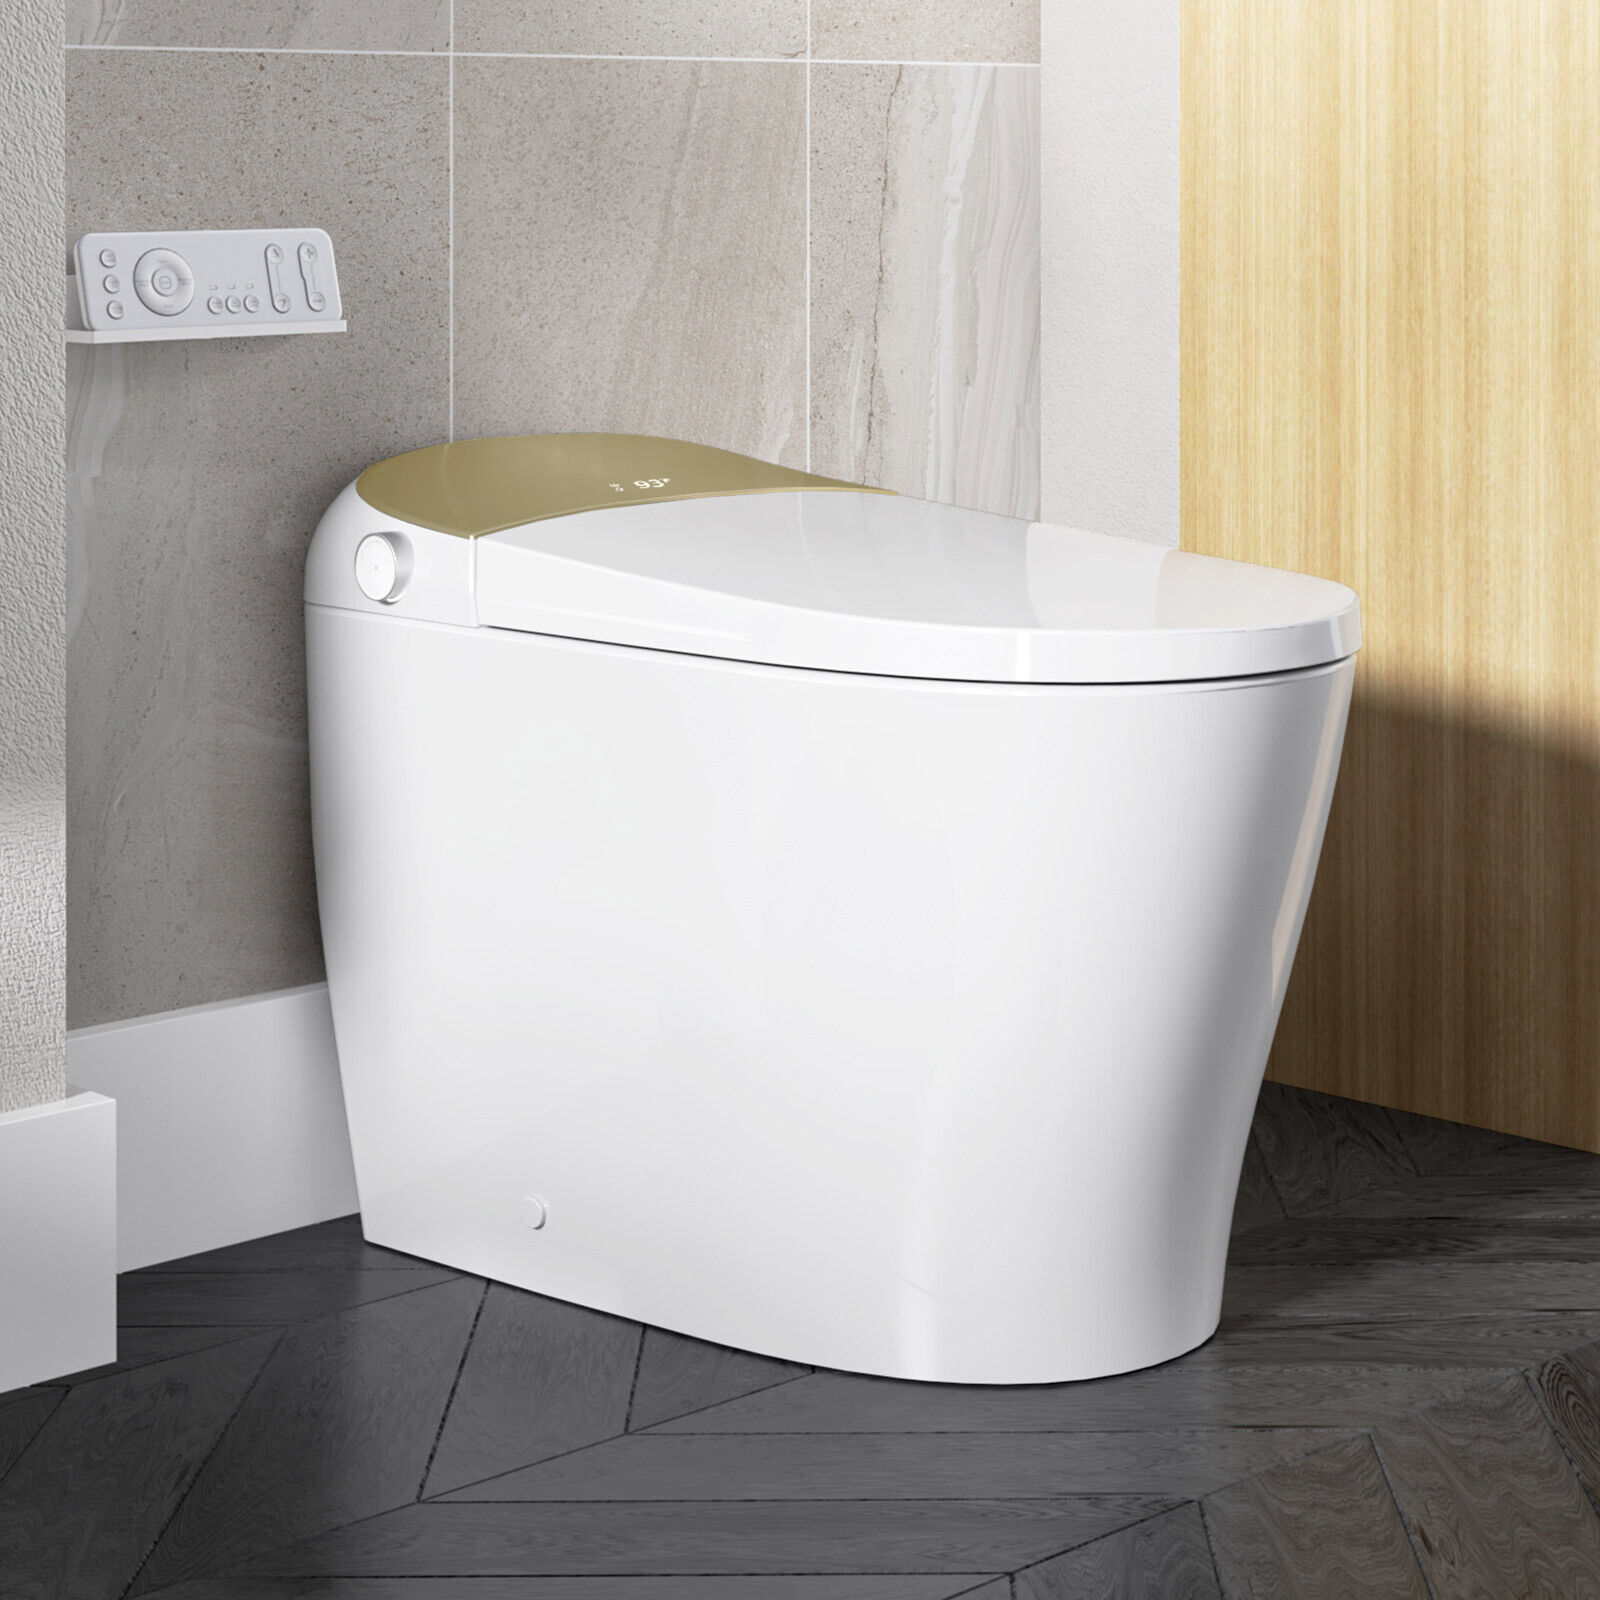 Upgrade Your Toilet Experience with HOROW Smart Toilet and Bidet Seat –Gold Back